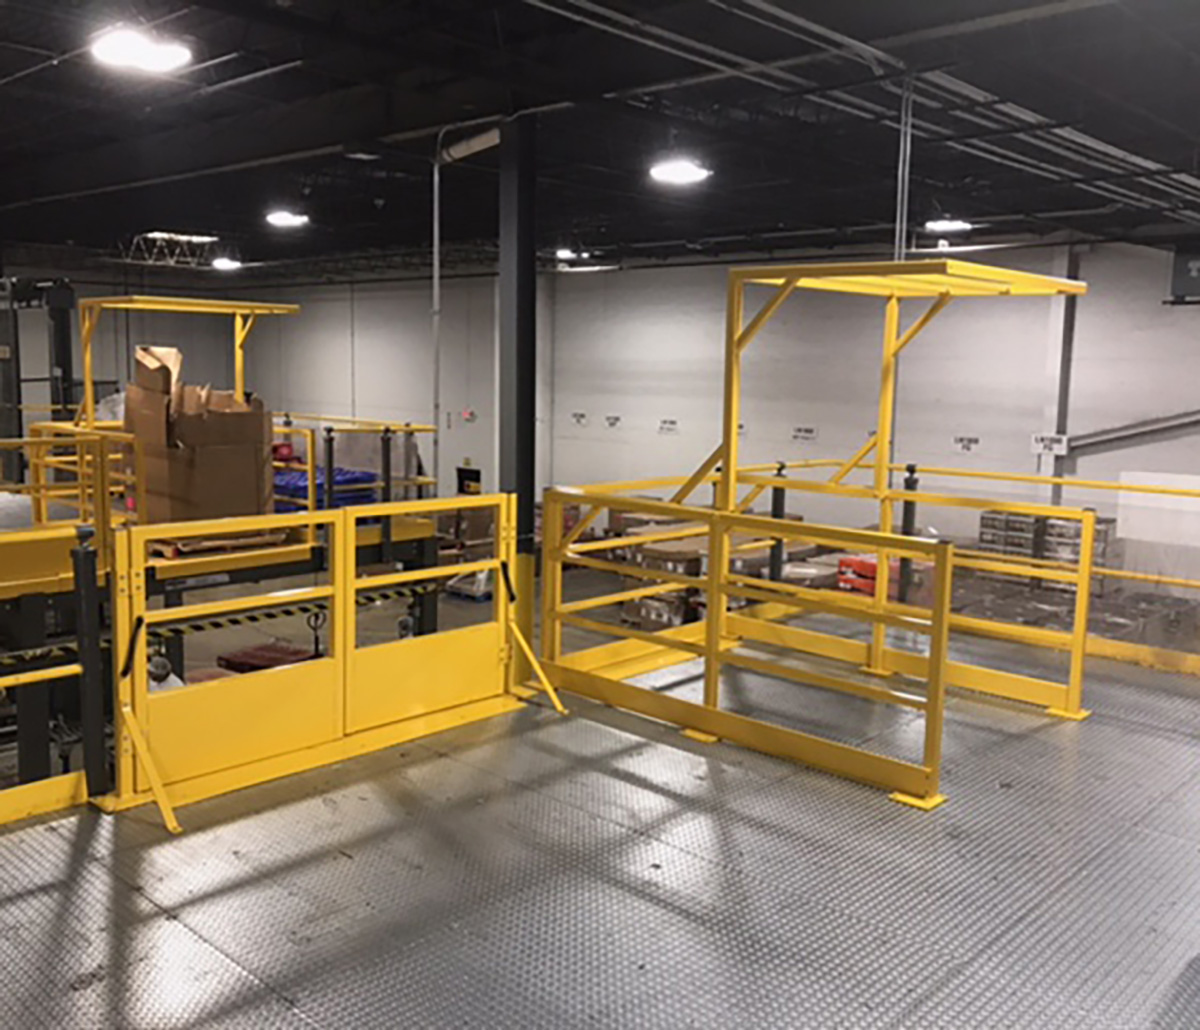 MiTek Gates Engineered Systems Products - Gate in a warehouse facility